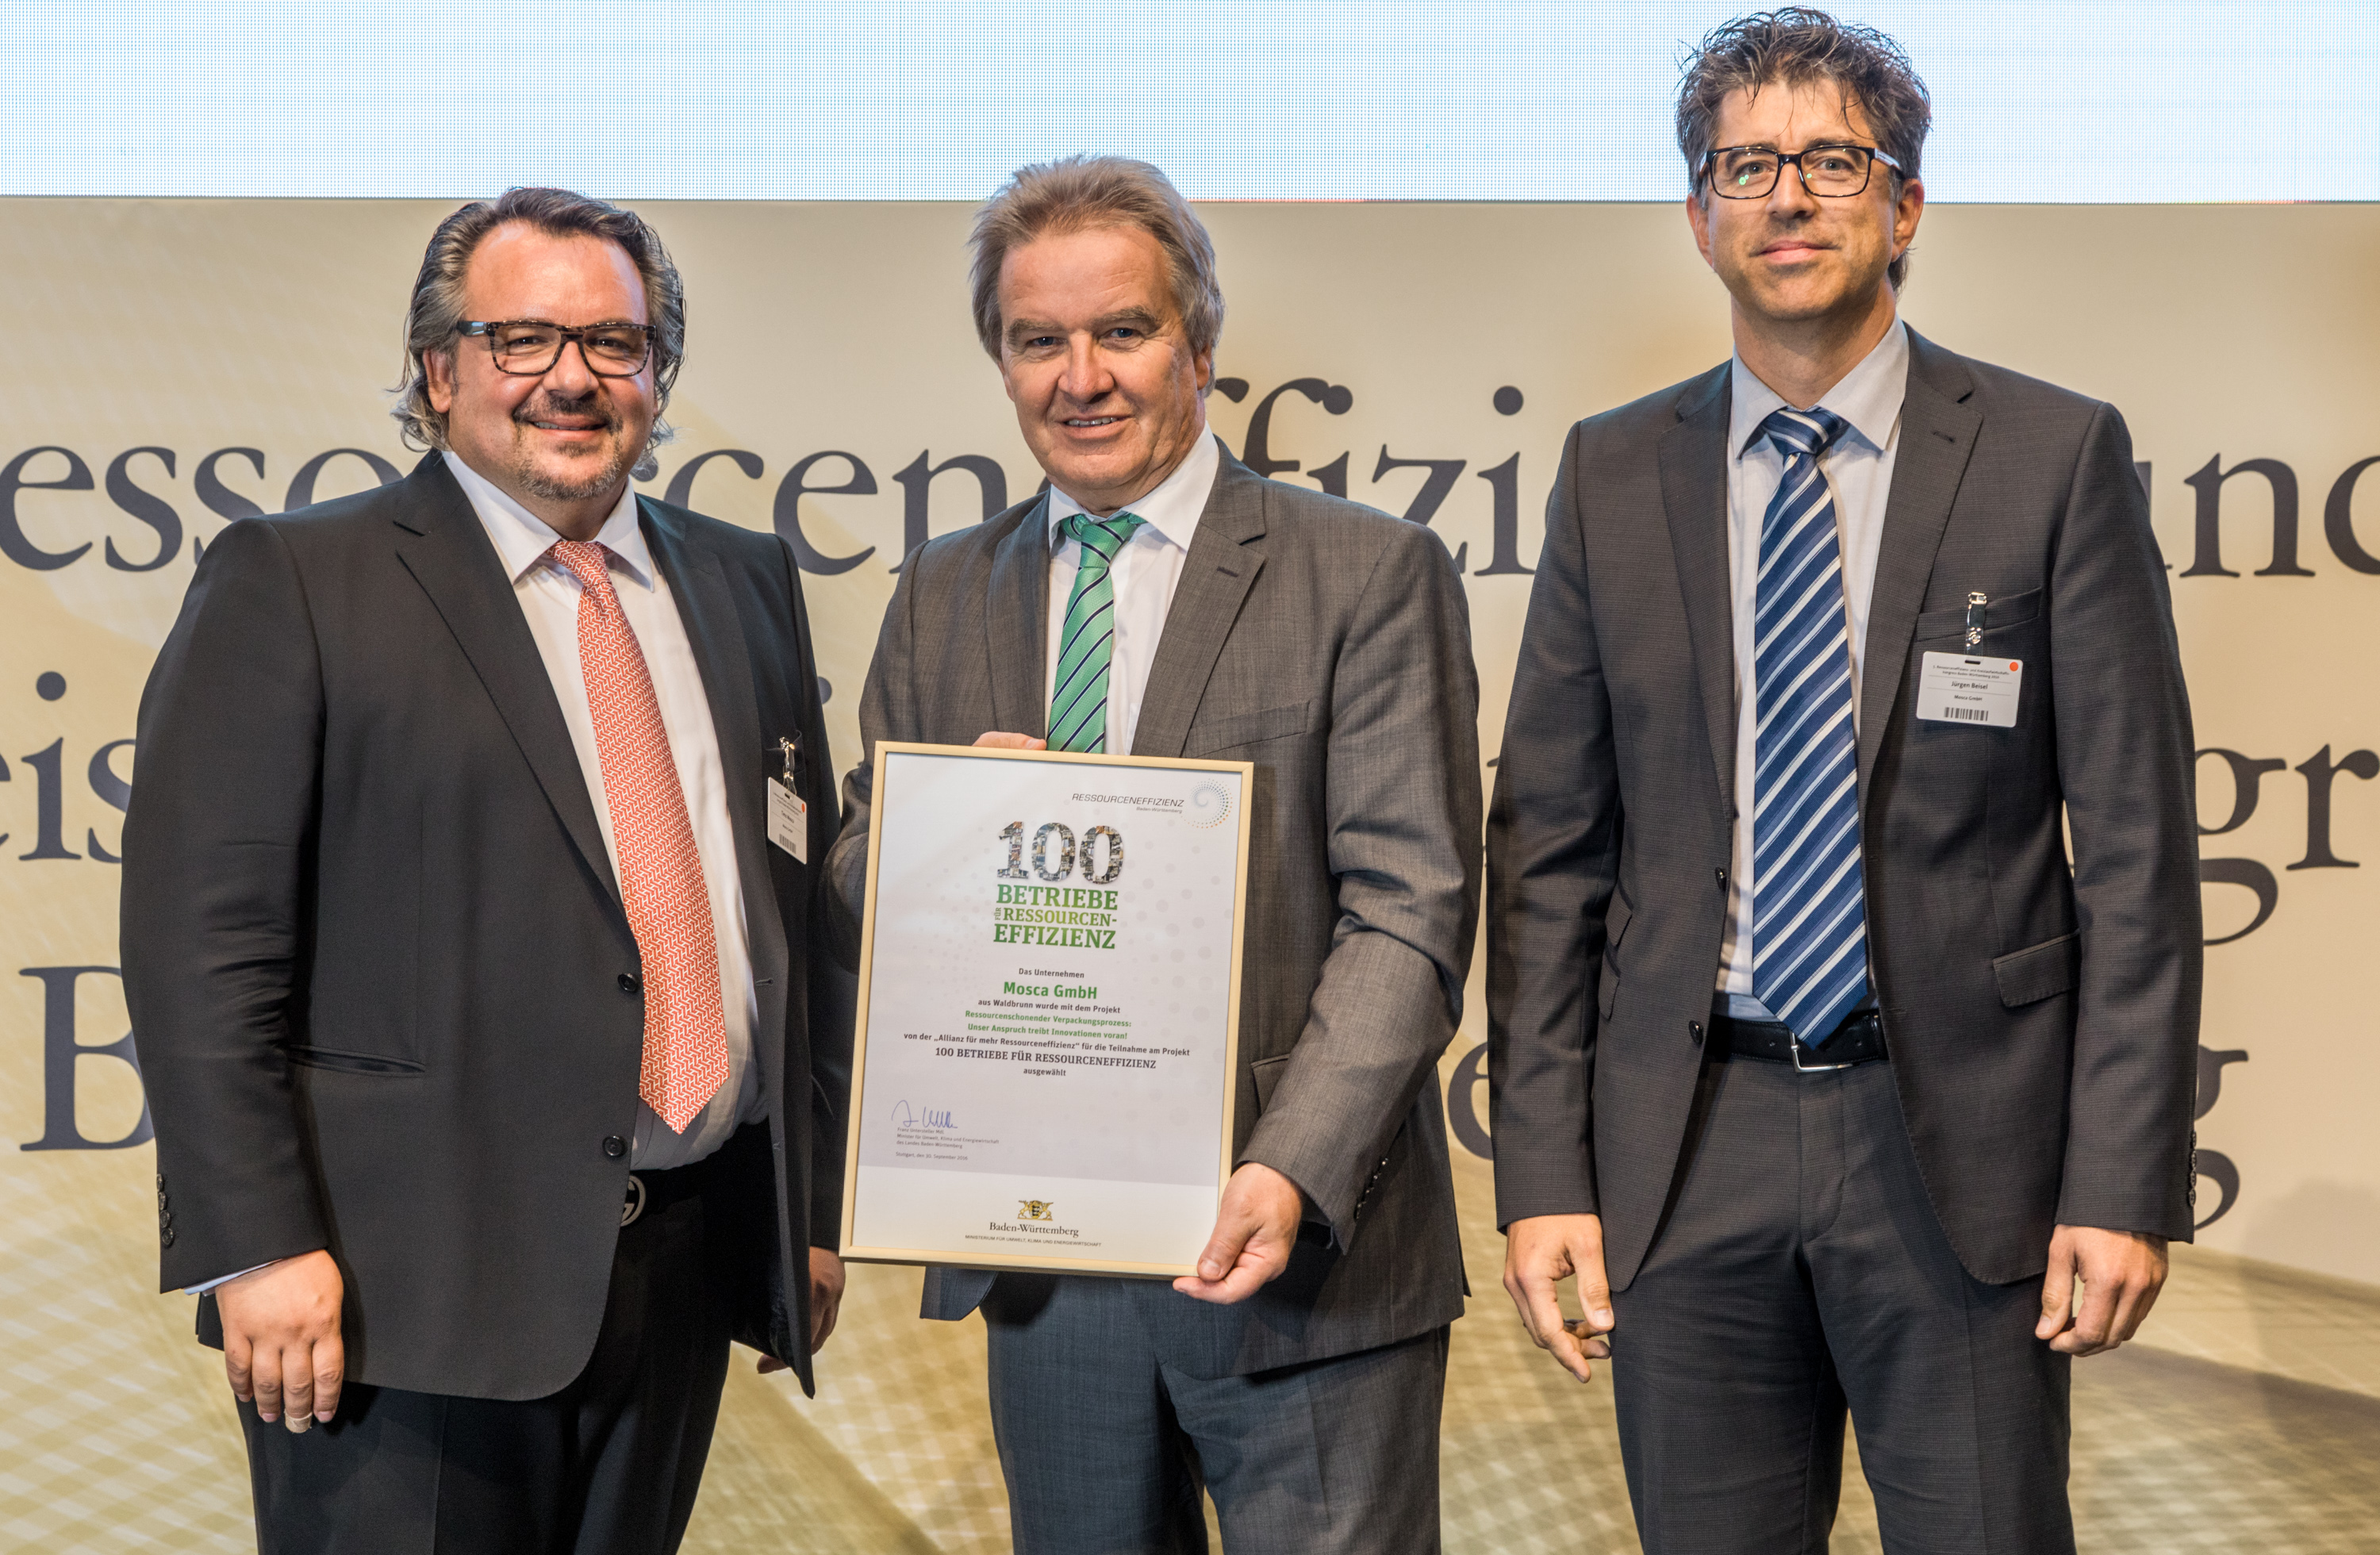 100 Companies for Resource Efficiency Awarded Mosca GmbH